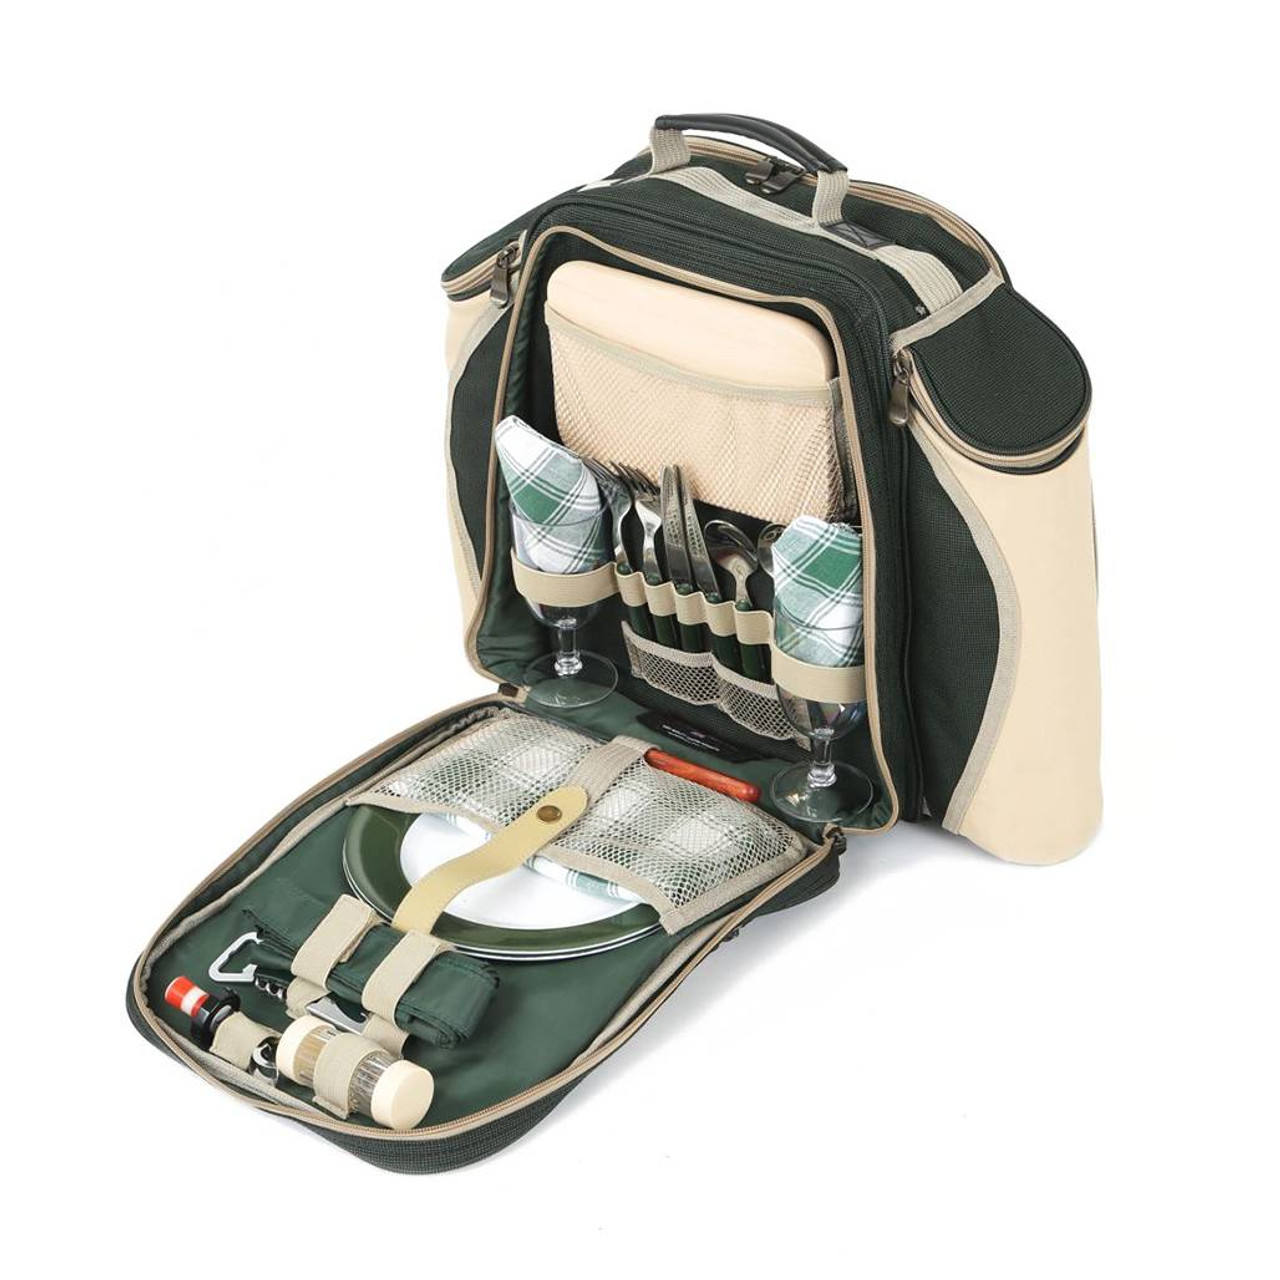 Deluxe Picnic Backpack Hamper For Two People